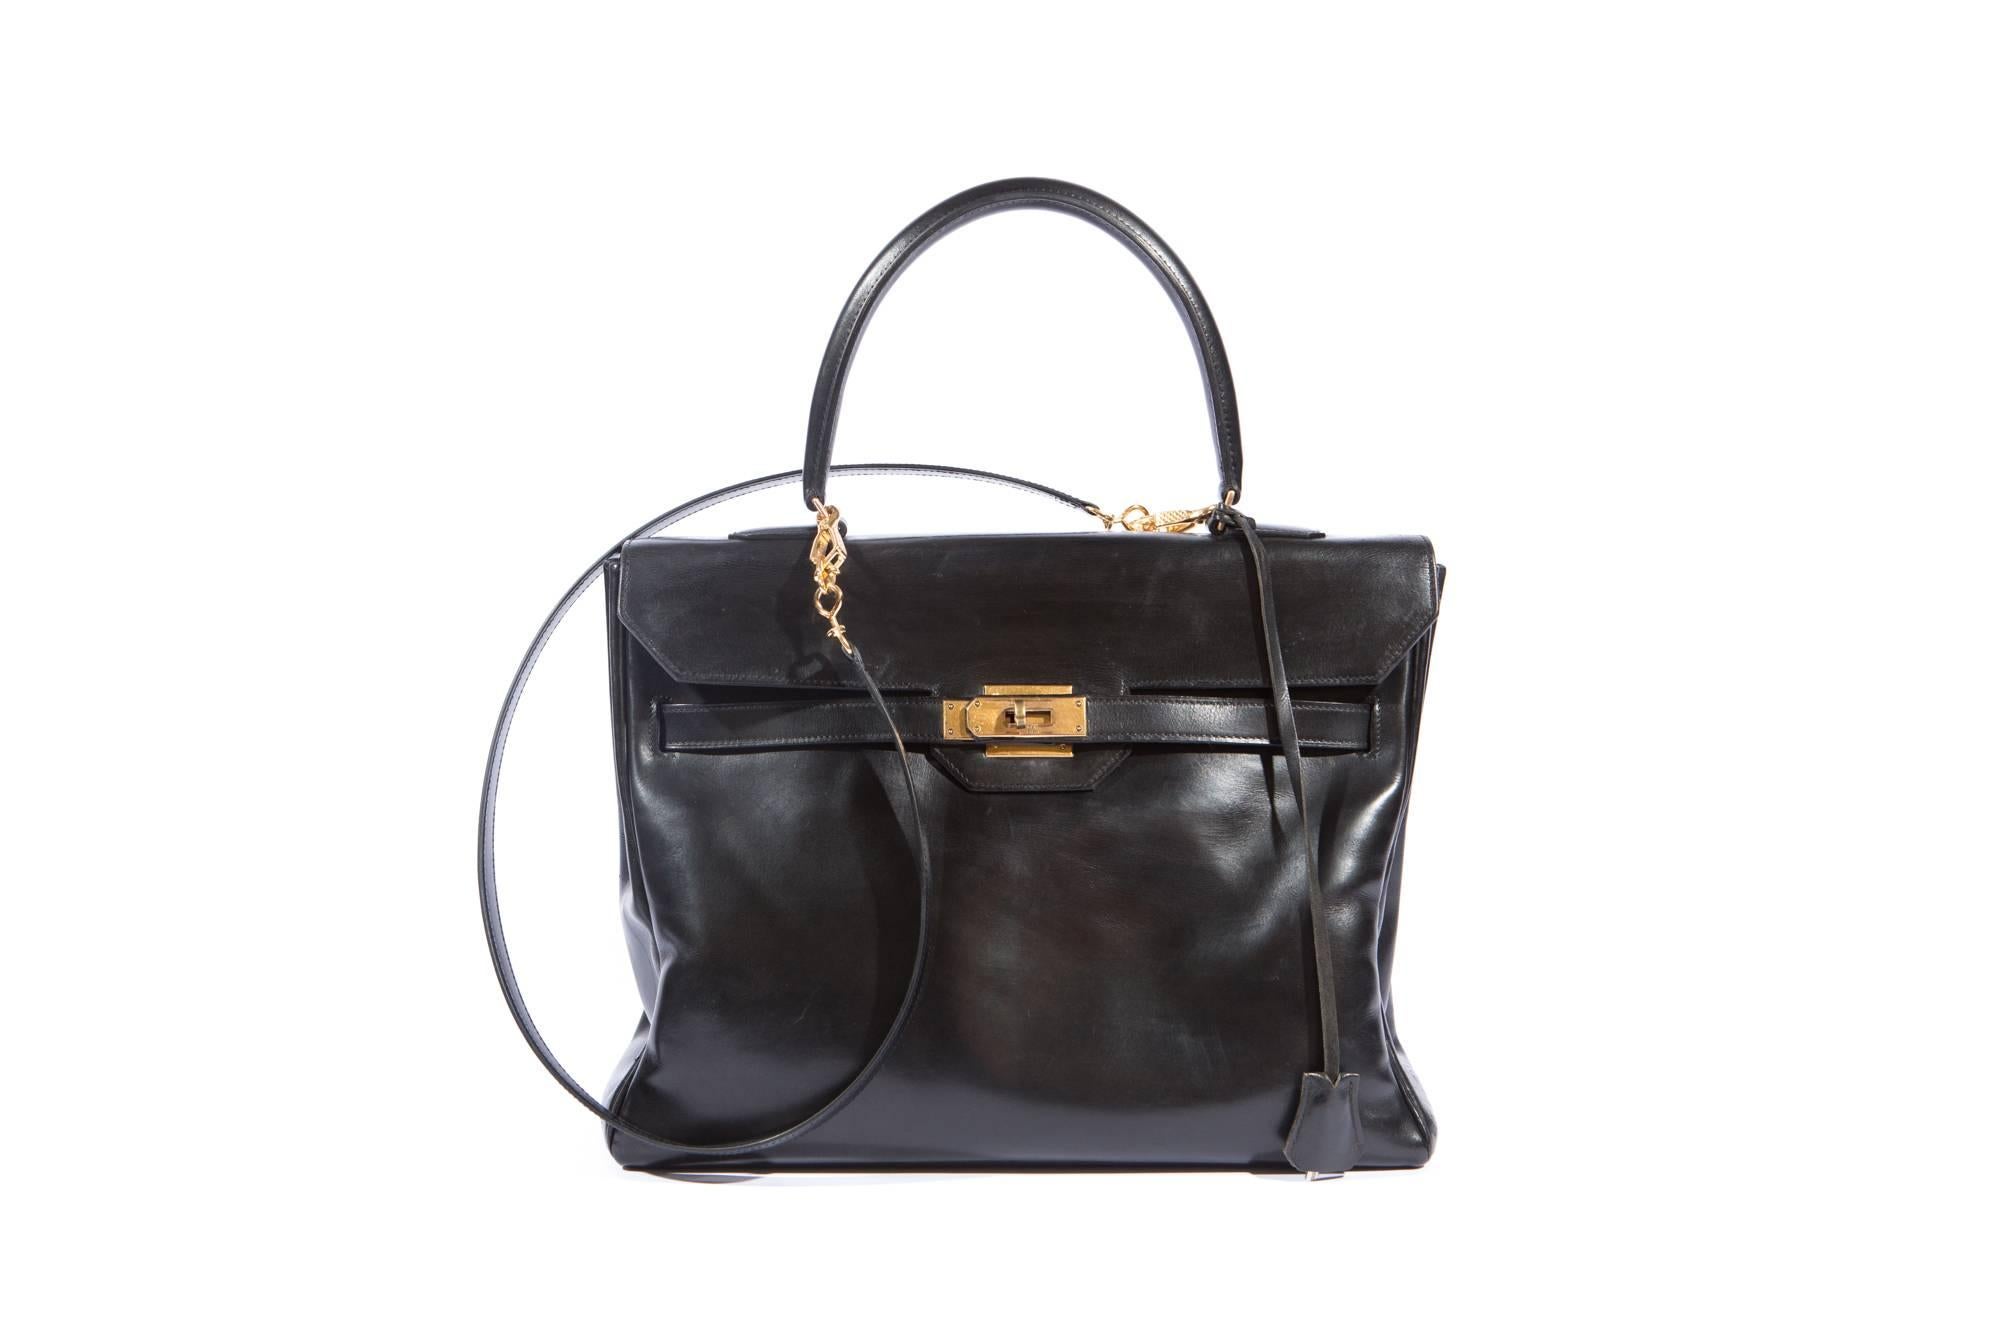 Fabulous Hermes Vintage black boxcalf Monaco bag in 32cm this classic bag features gold- plated hardware and comes with it's original clochette, key, a separated black box calf shoulder strap, (please note this black boxcalf shoulder strap has been